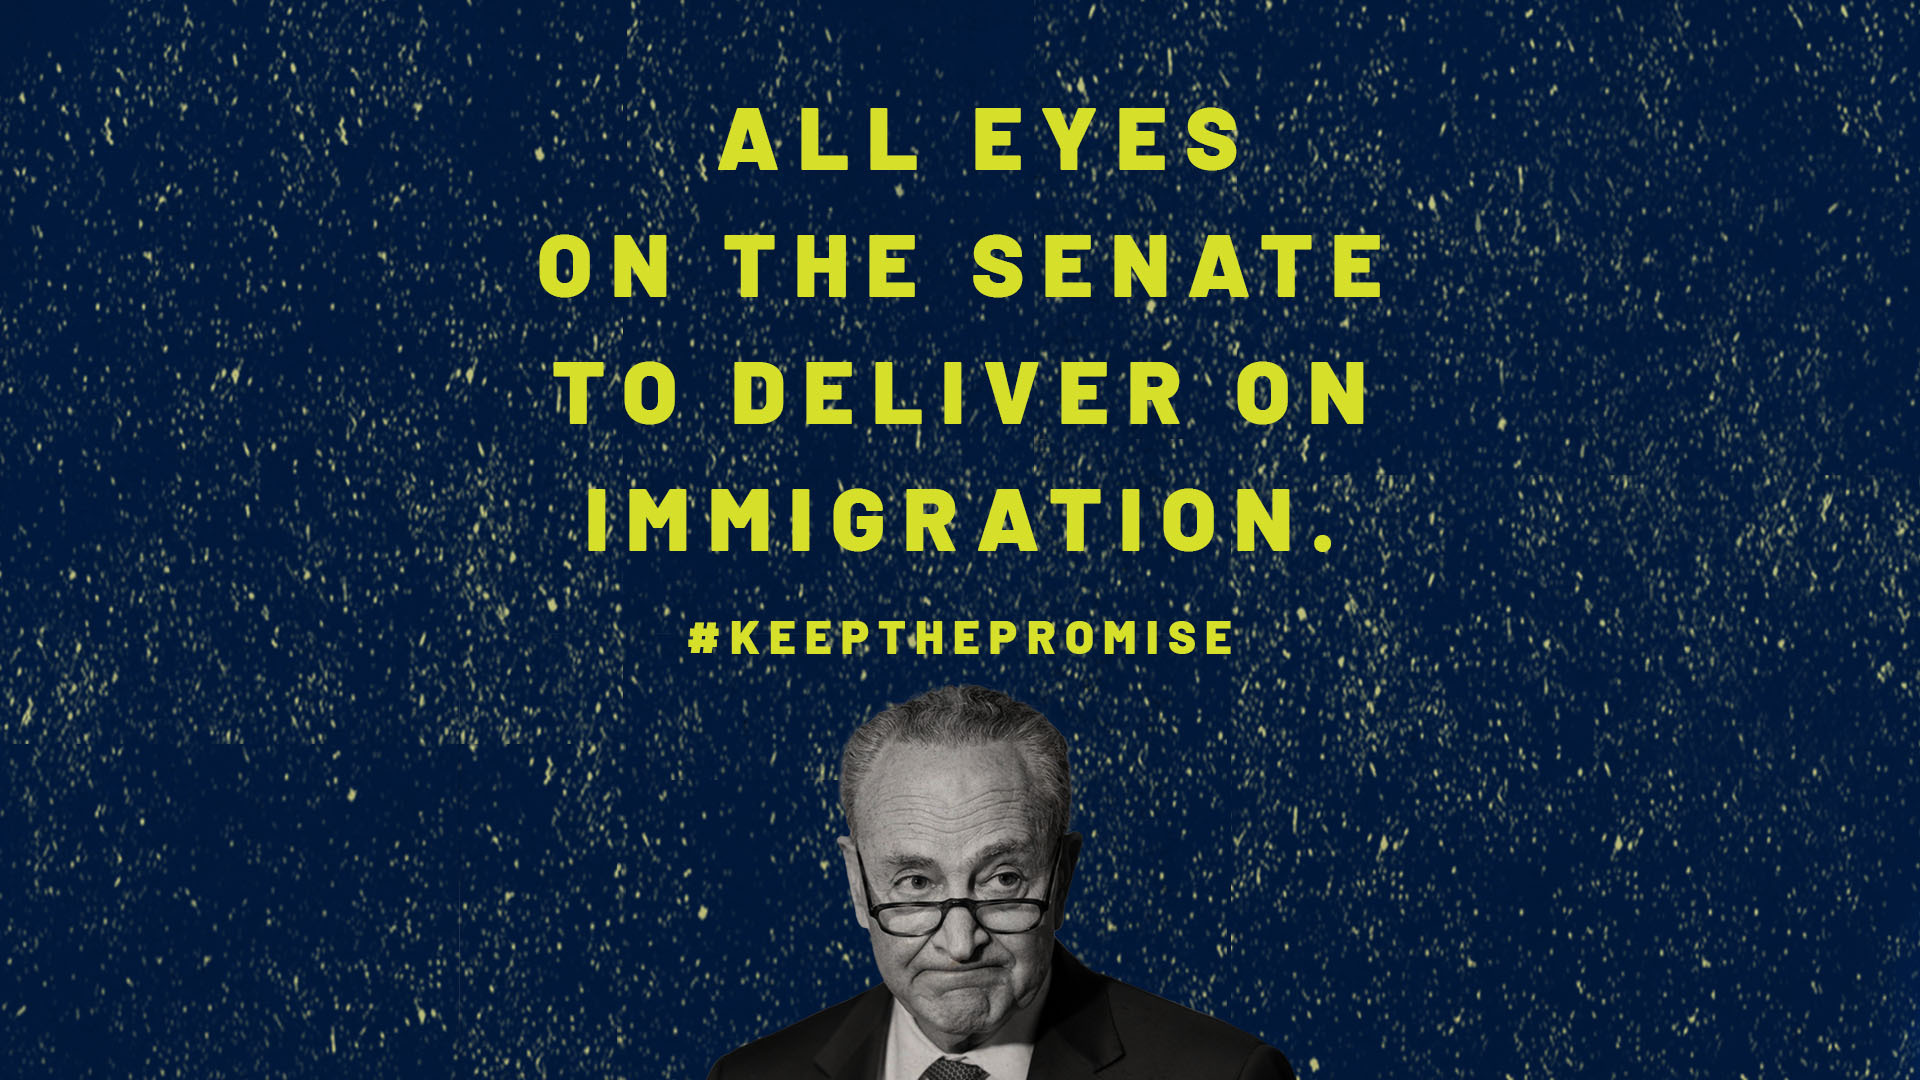 This our chance to fight for more: All eyes on the Senate to deliver on immigration